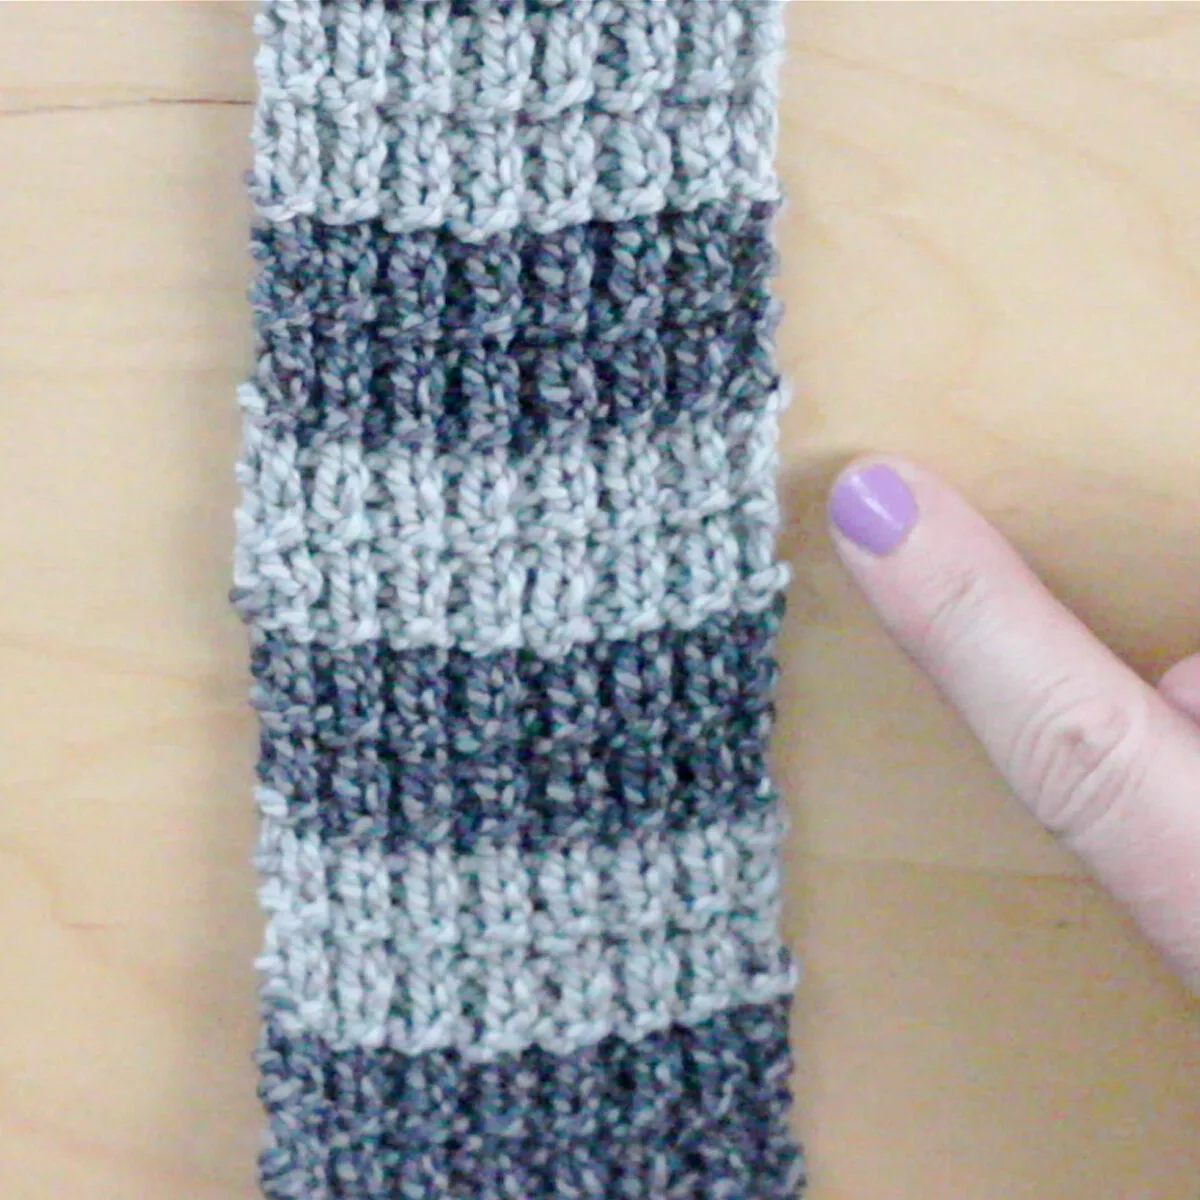 Knitted swatch in gray colored horizontal stripes with woman's hand.